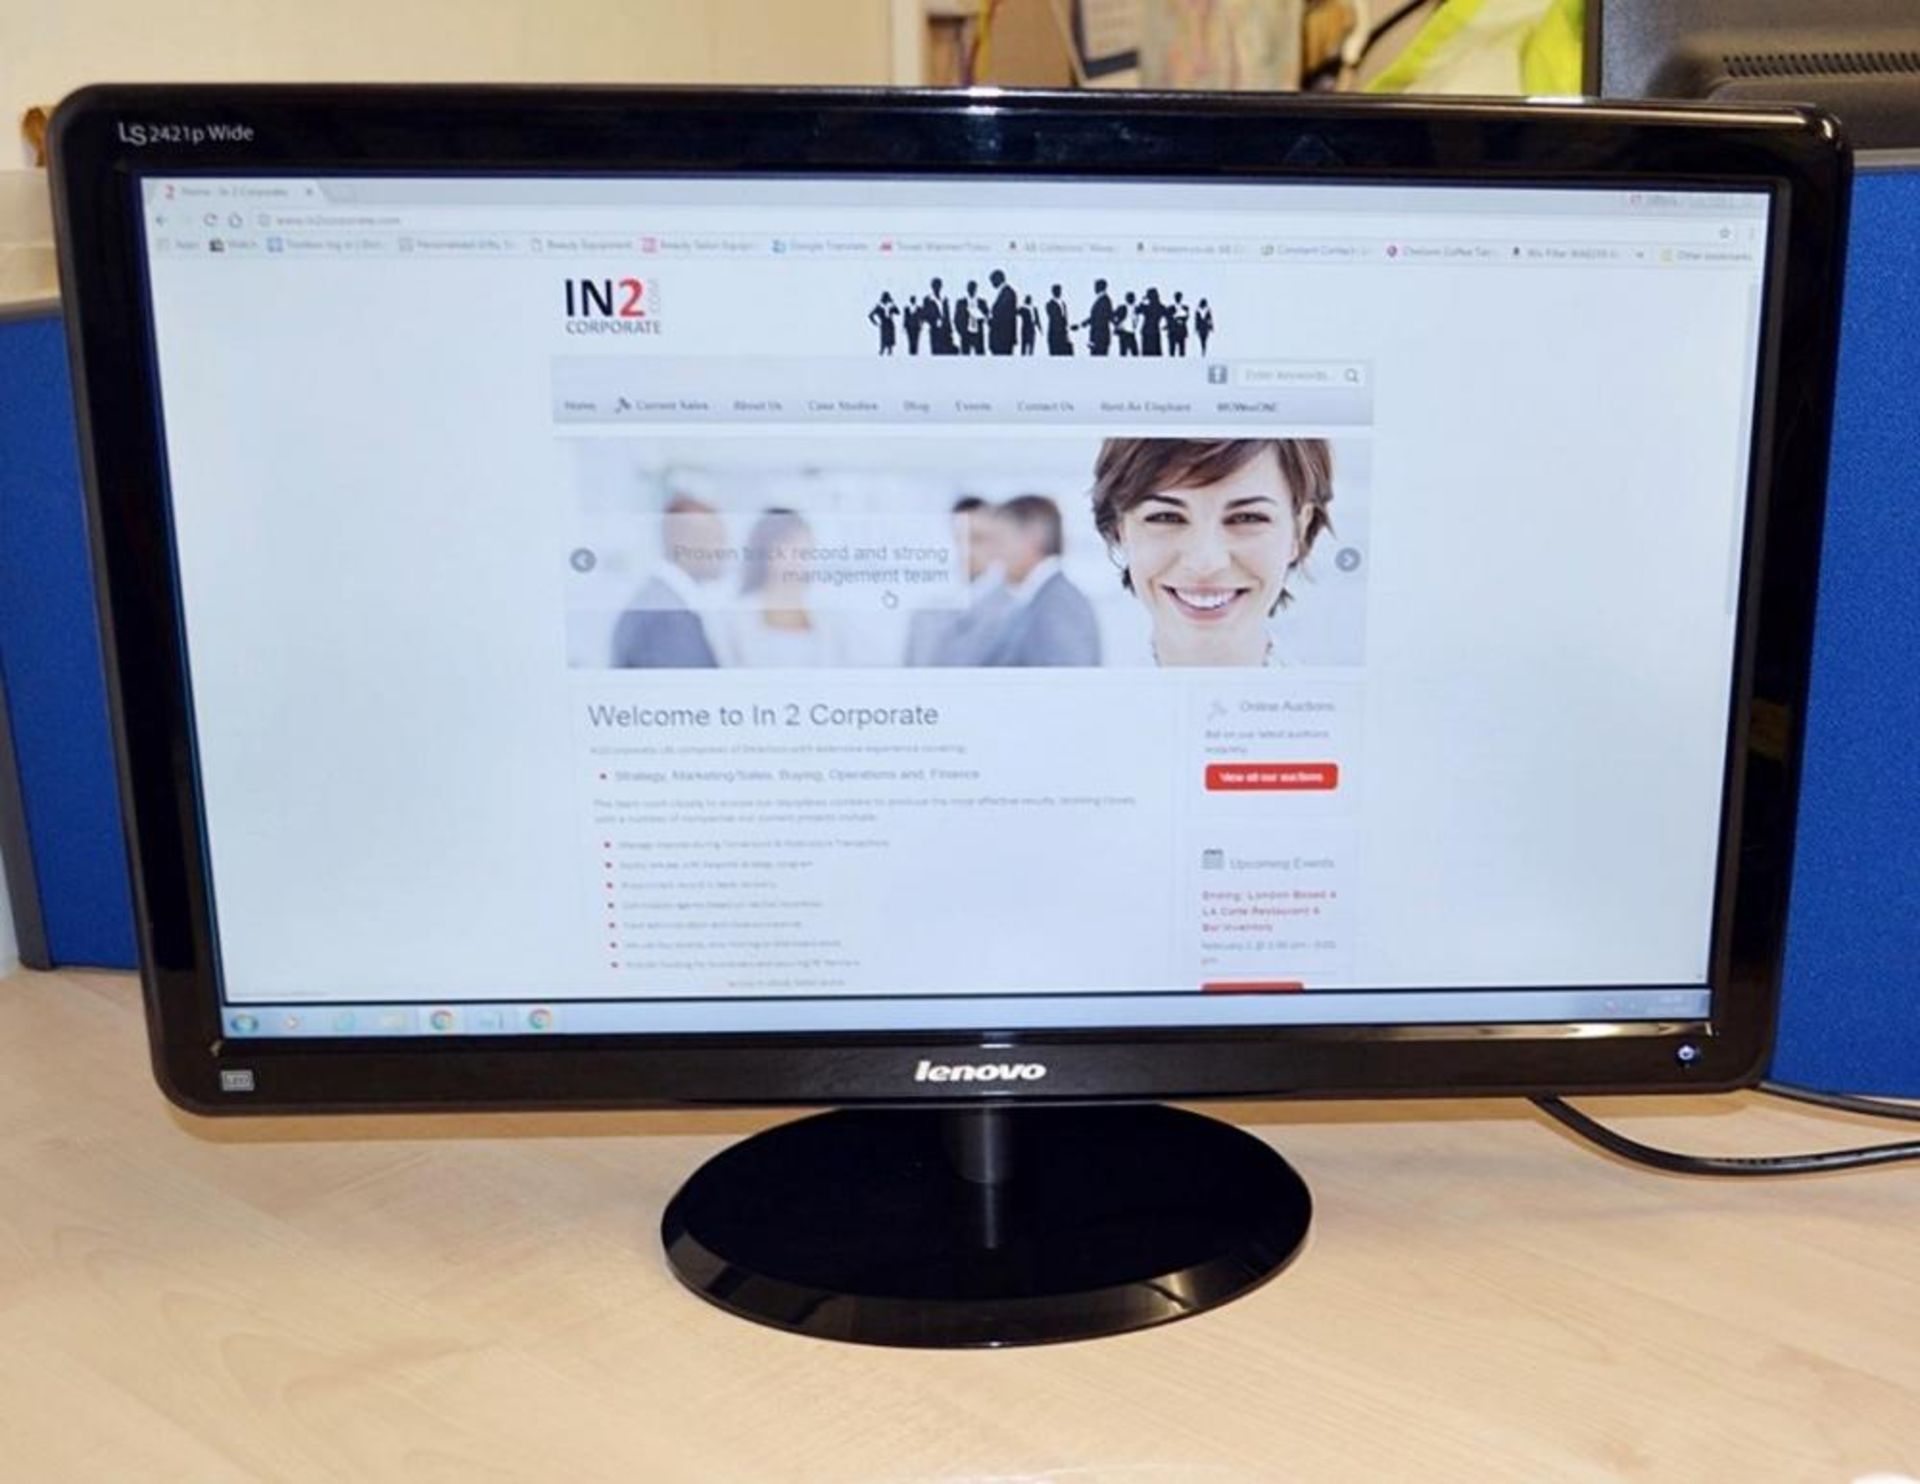 1 x Lenovo LS2421p Wide 23.6" Full HD LED TFT Monitor (Model: 4015-LS1) - Recently Taken From A Work - Image 11 of 14